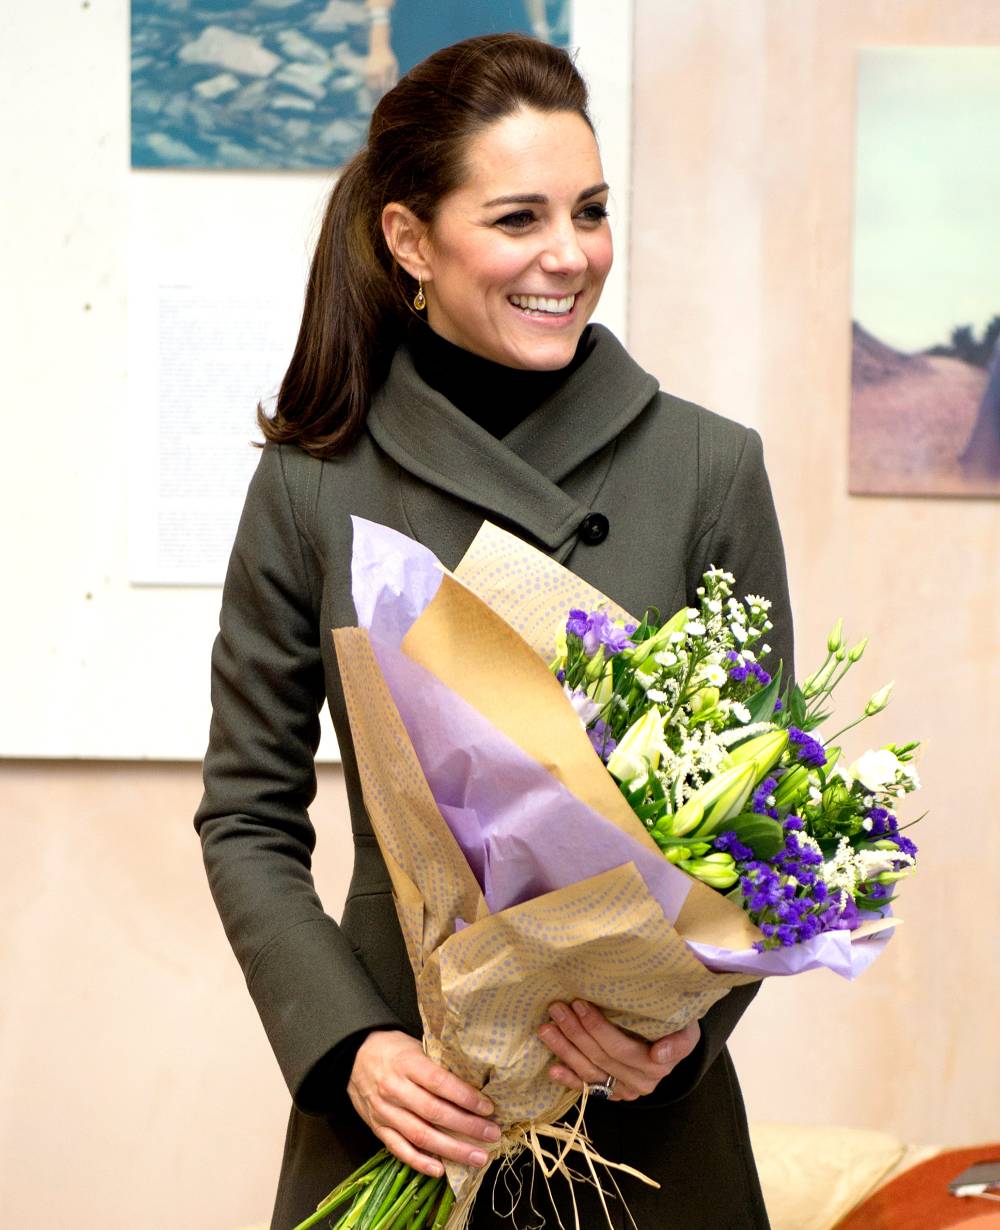 Kate Middleton receives a bouquet of flowers as she visits a photographic exhibition entitled